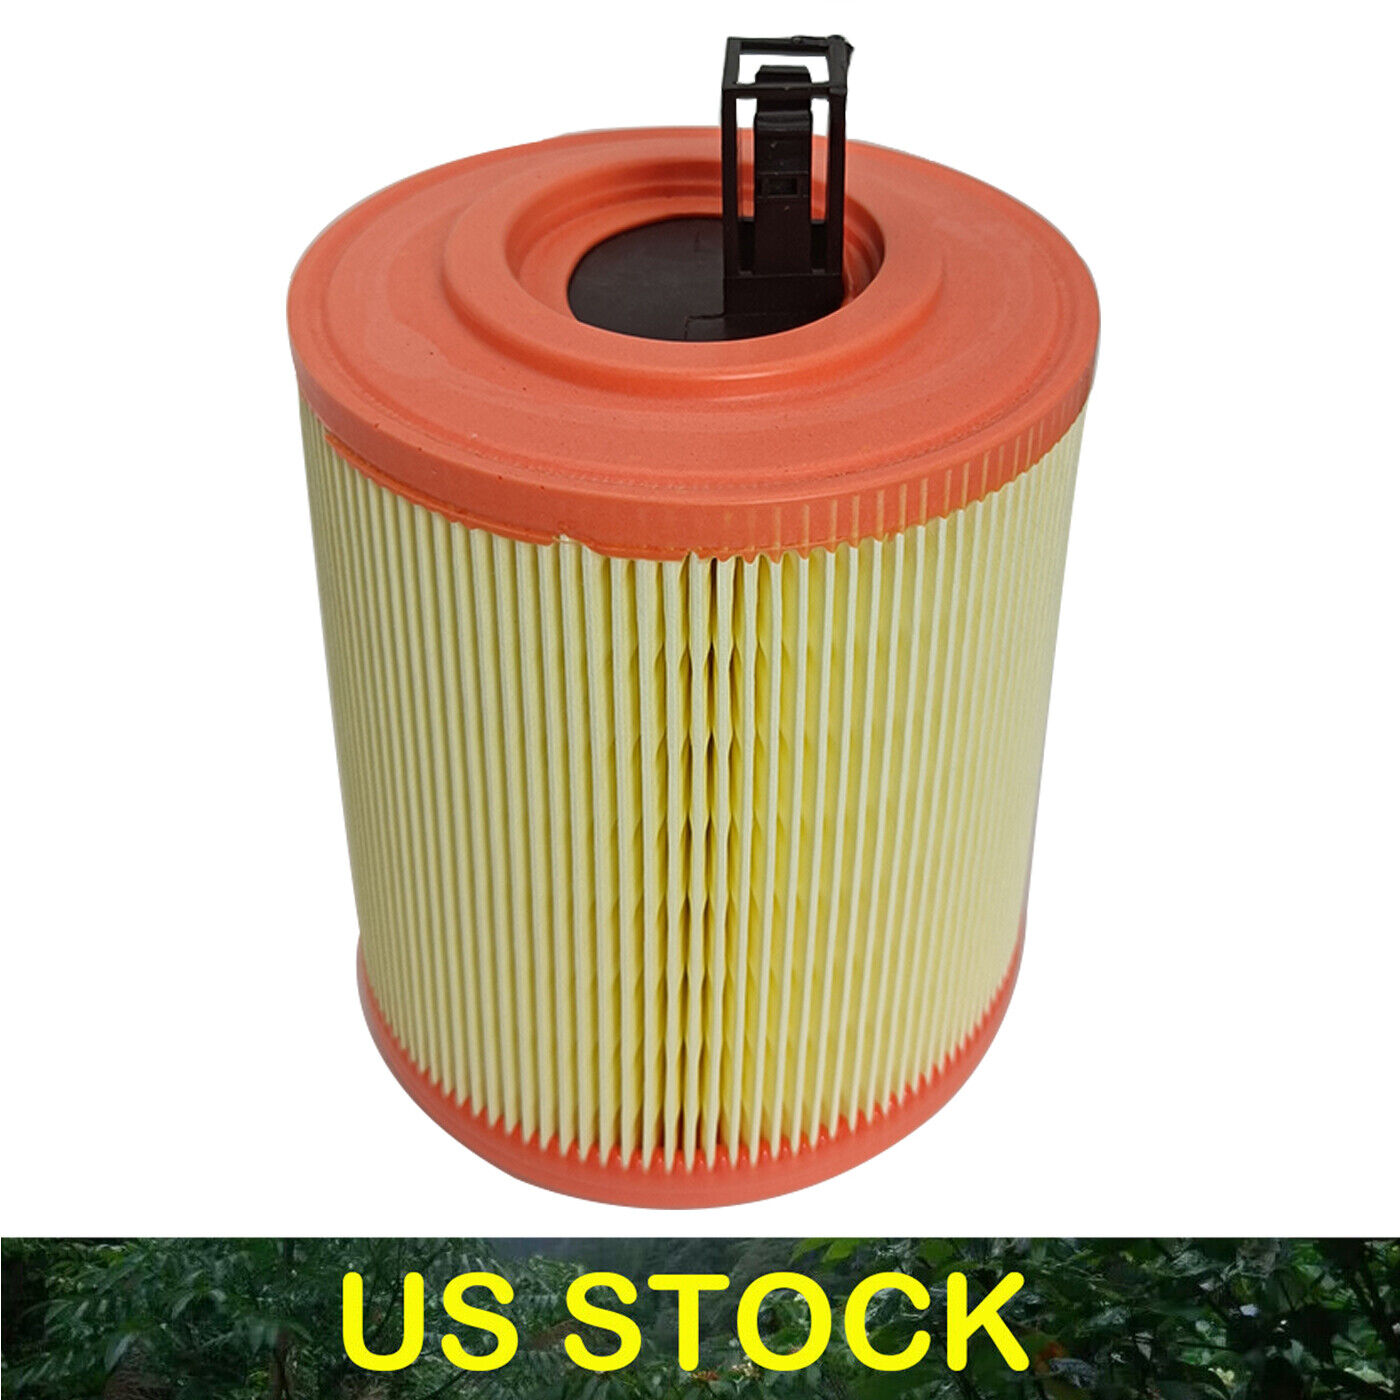 Engine Air Filter For 2016-2019 Chevy Cruze 1.4L & Cadillac ATS V6 Twin-Turbo